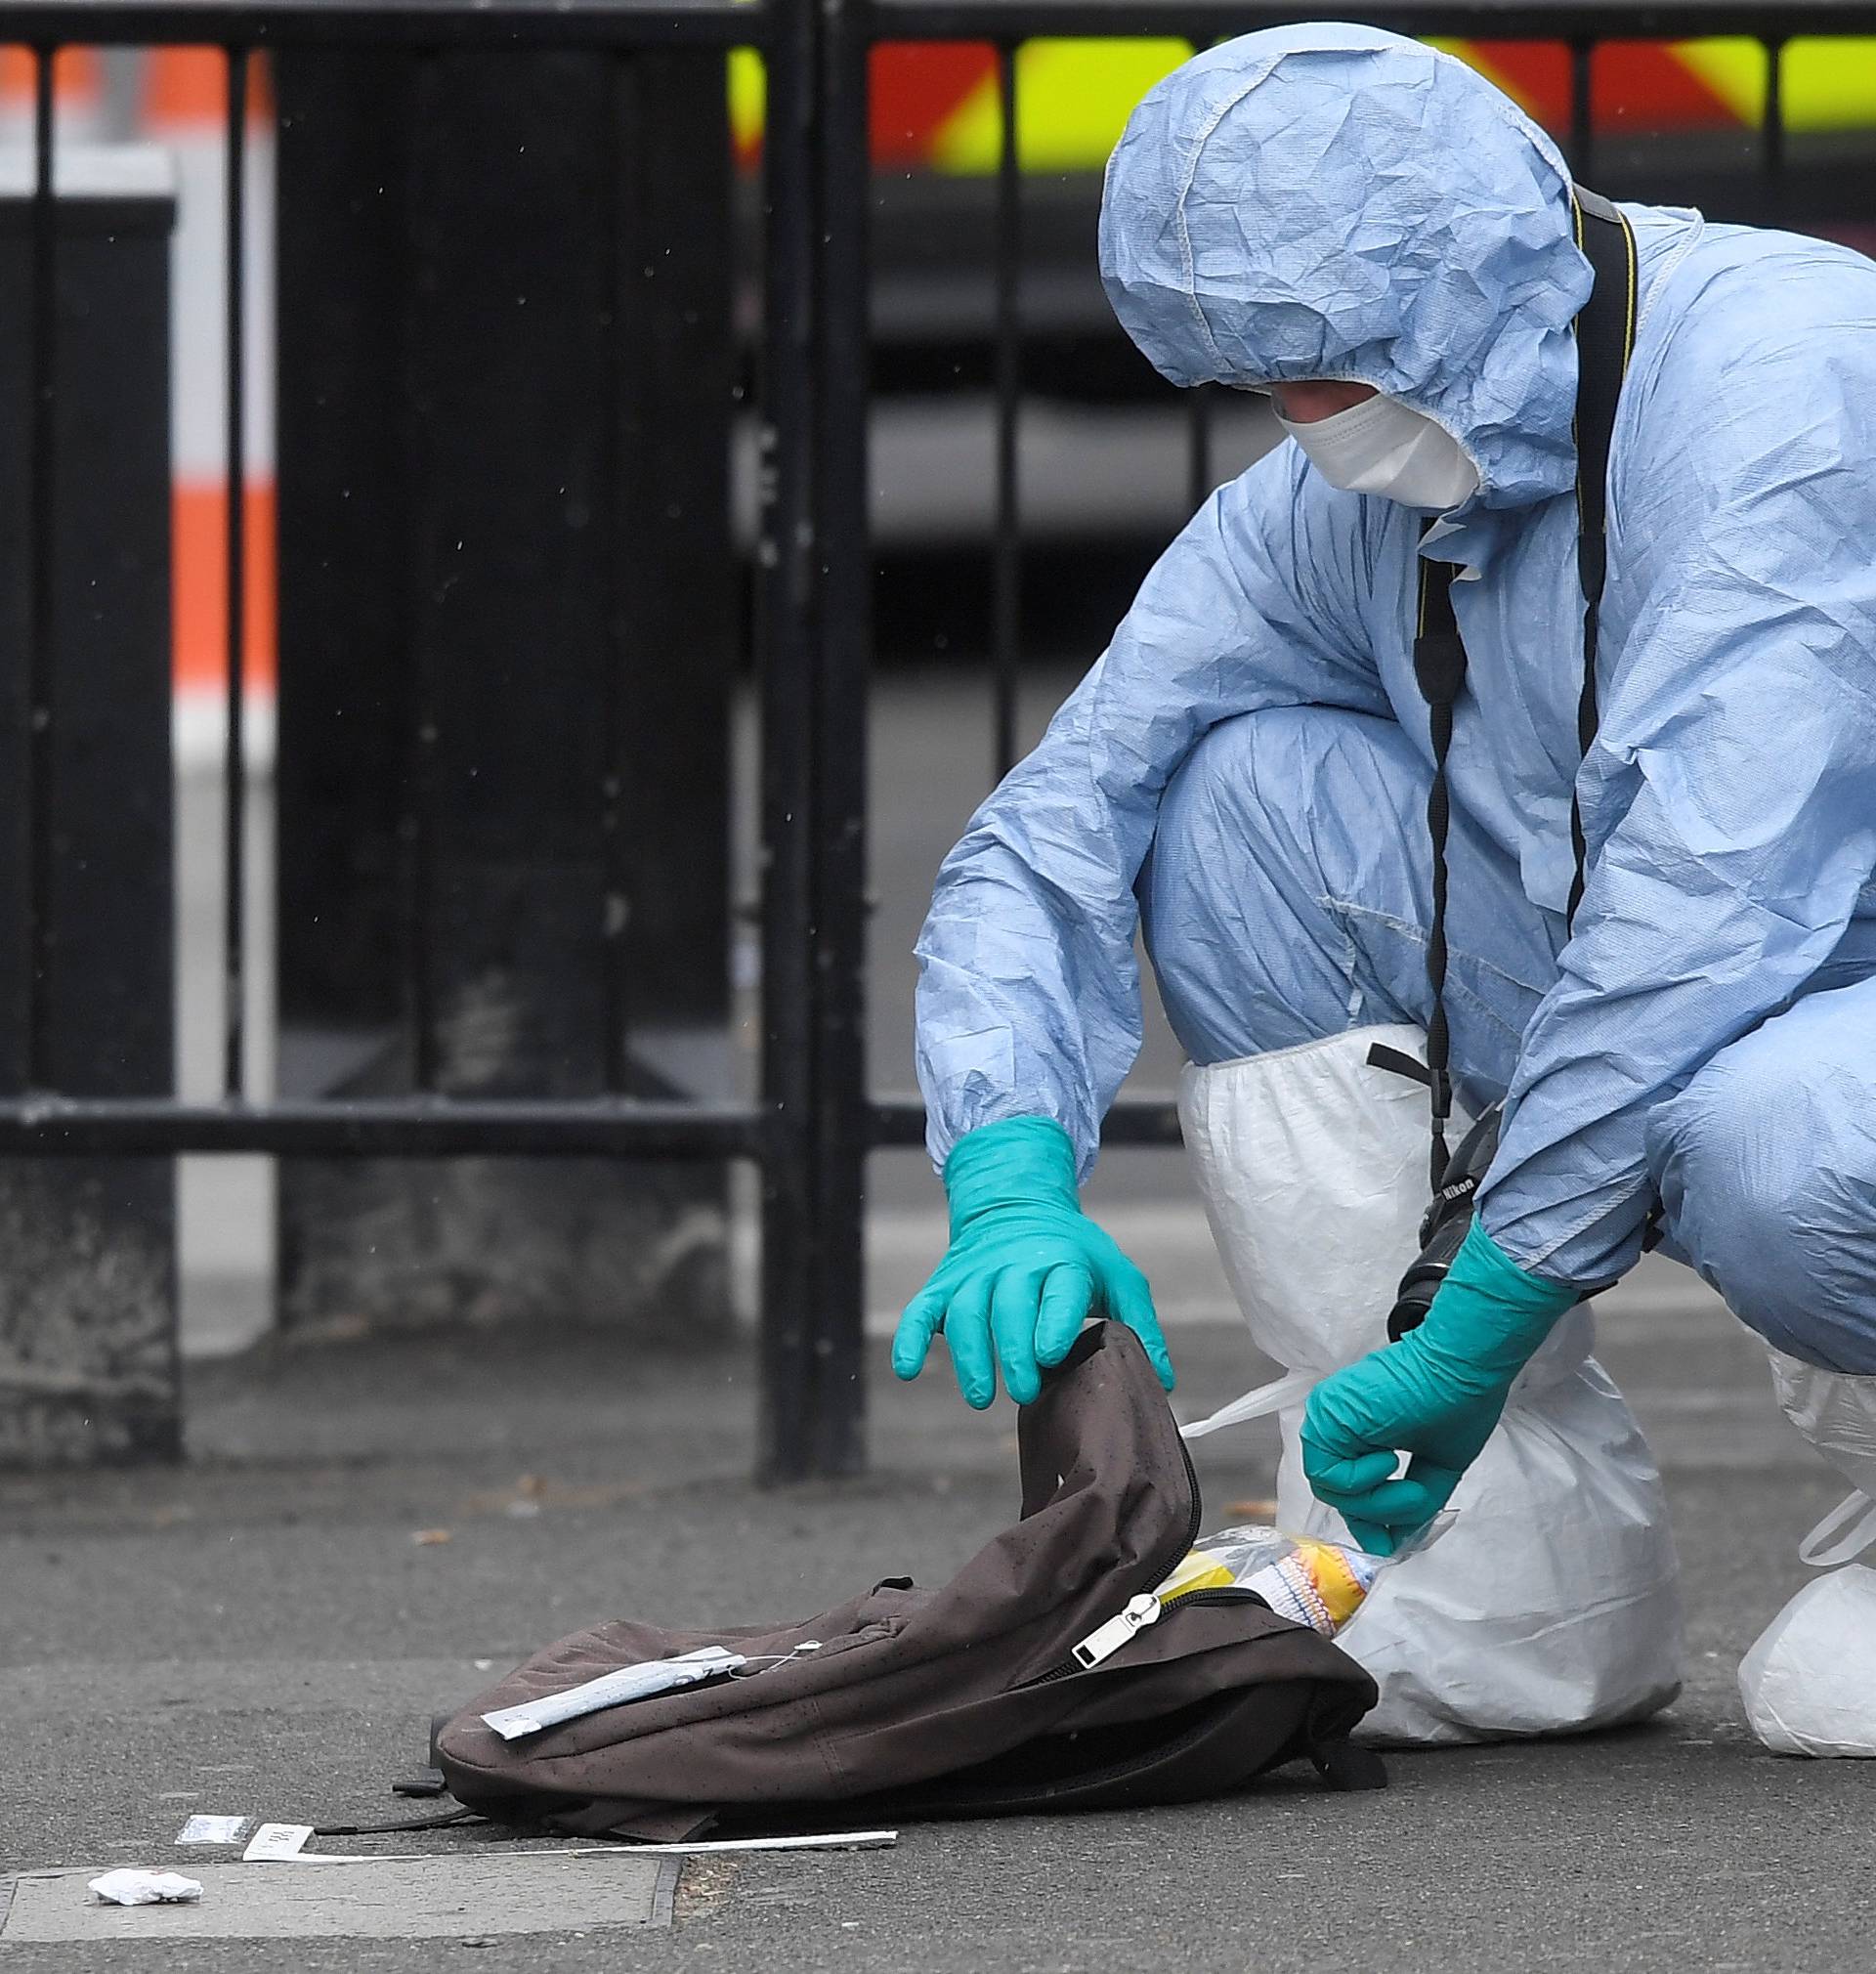 A forensic investigator opens a rucksack after man was arrested on Whitehall in Westminster in central London